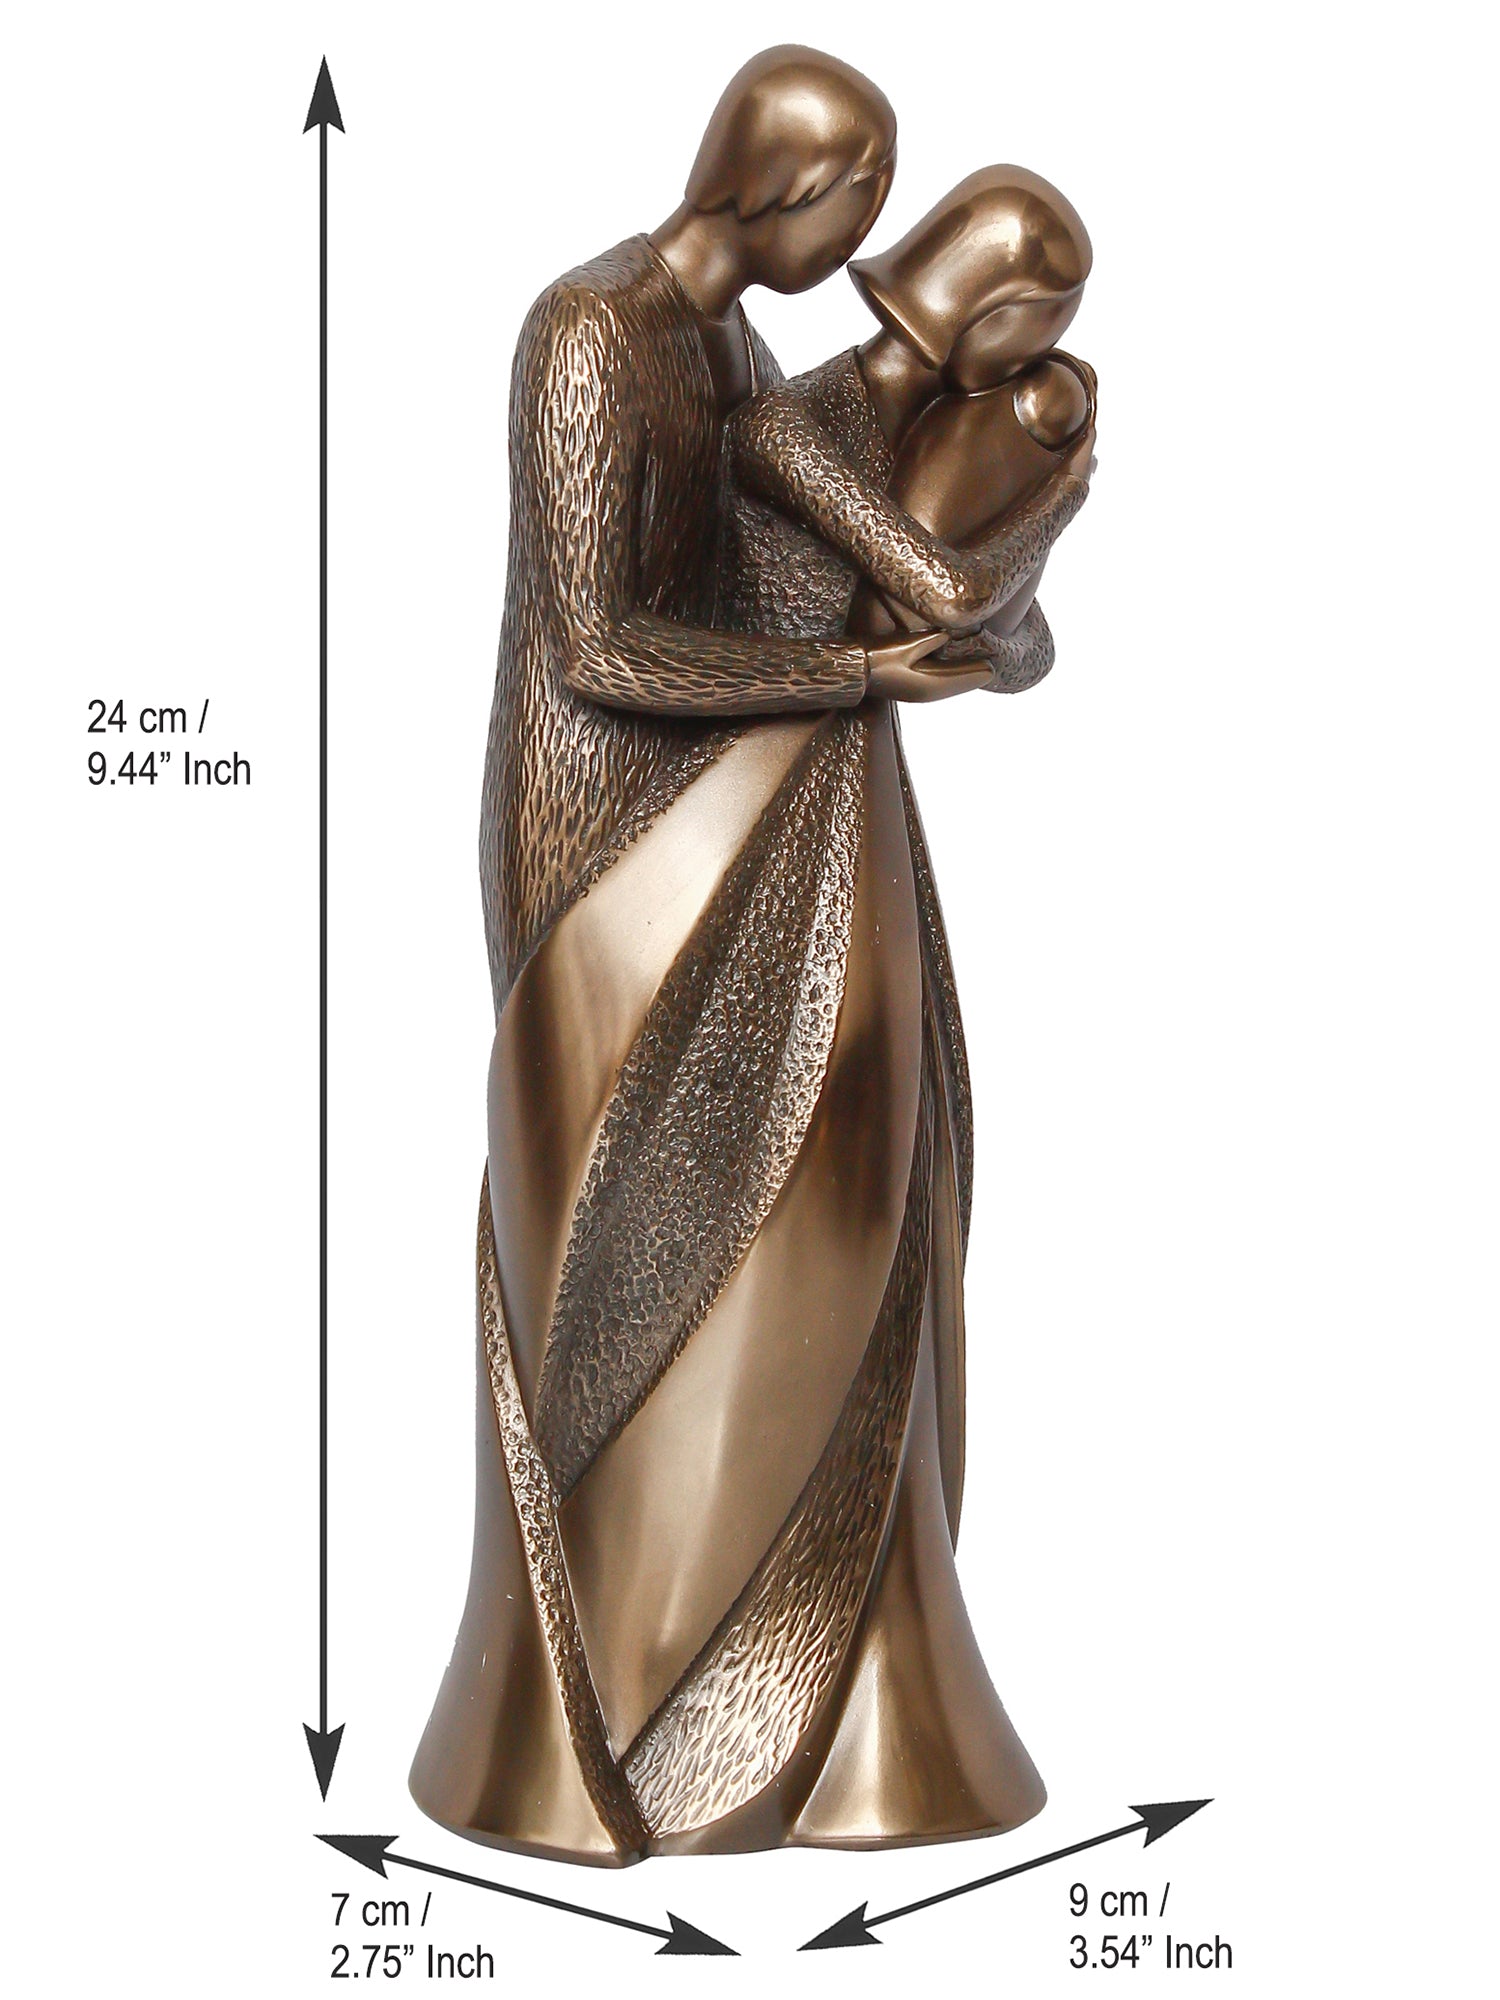 Brown Polyresin and Bronze Beloved Family of Husband, Wife and Kid Human Figurine Decorative Showpiece 3